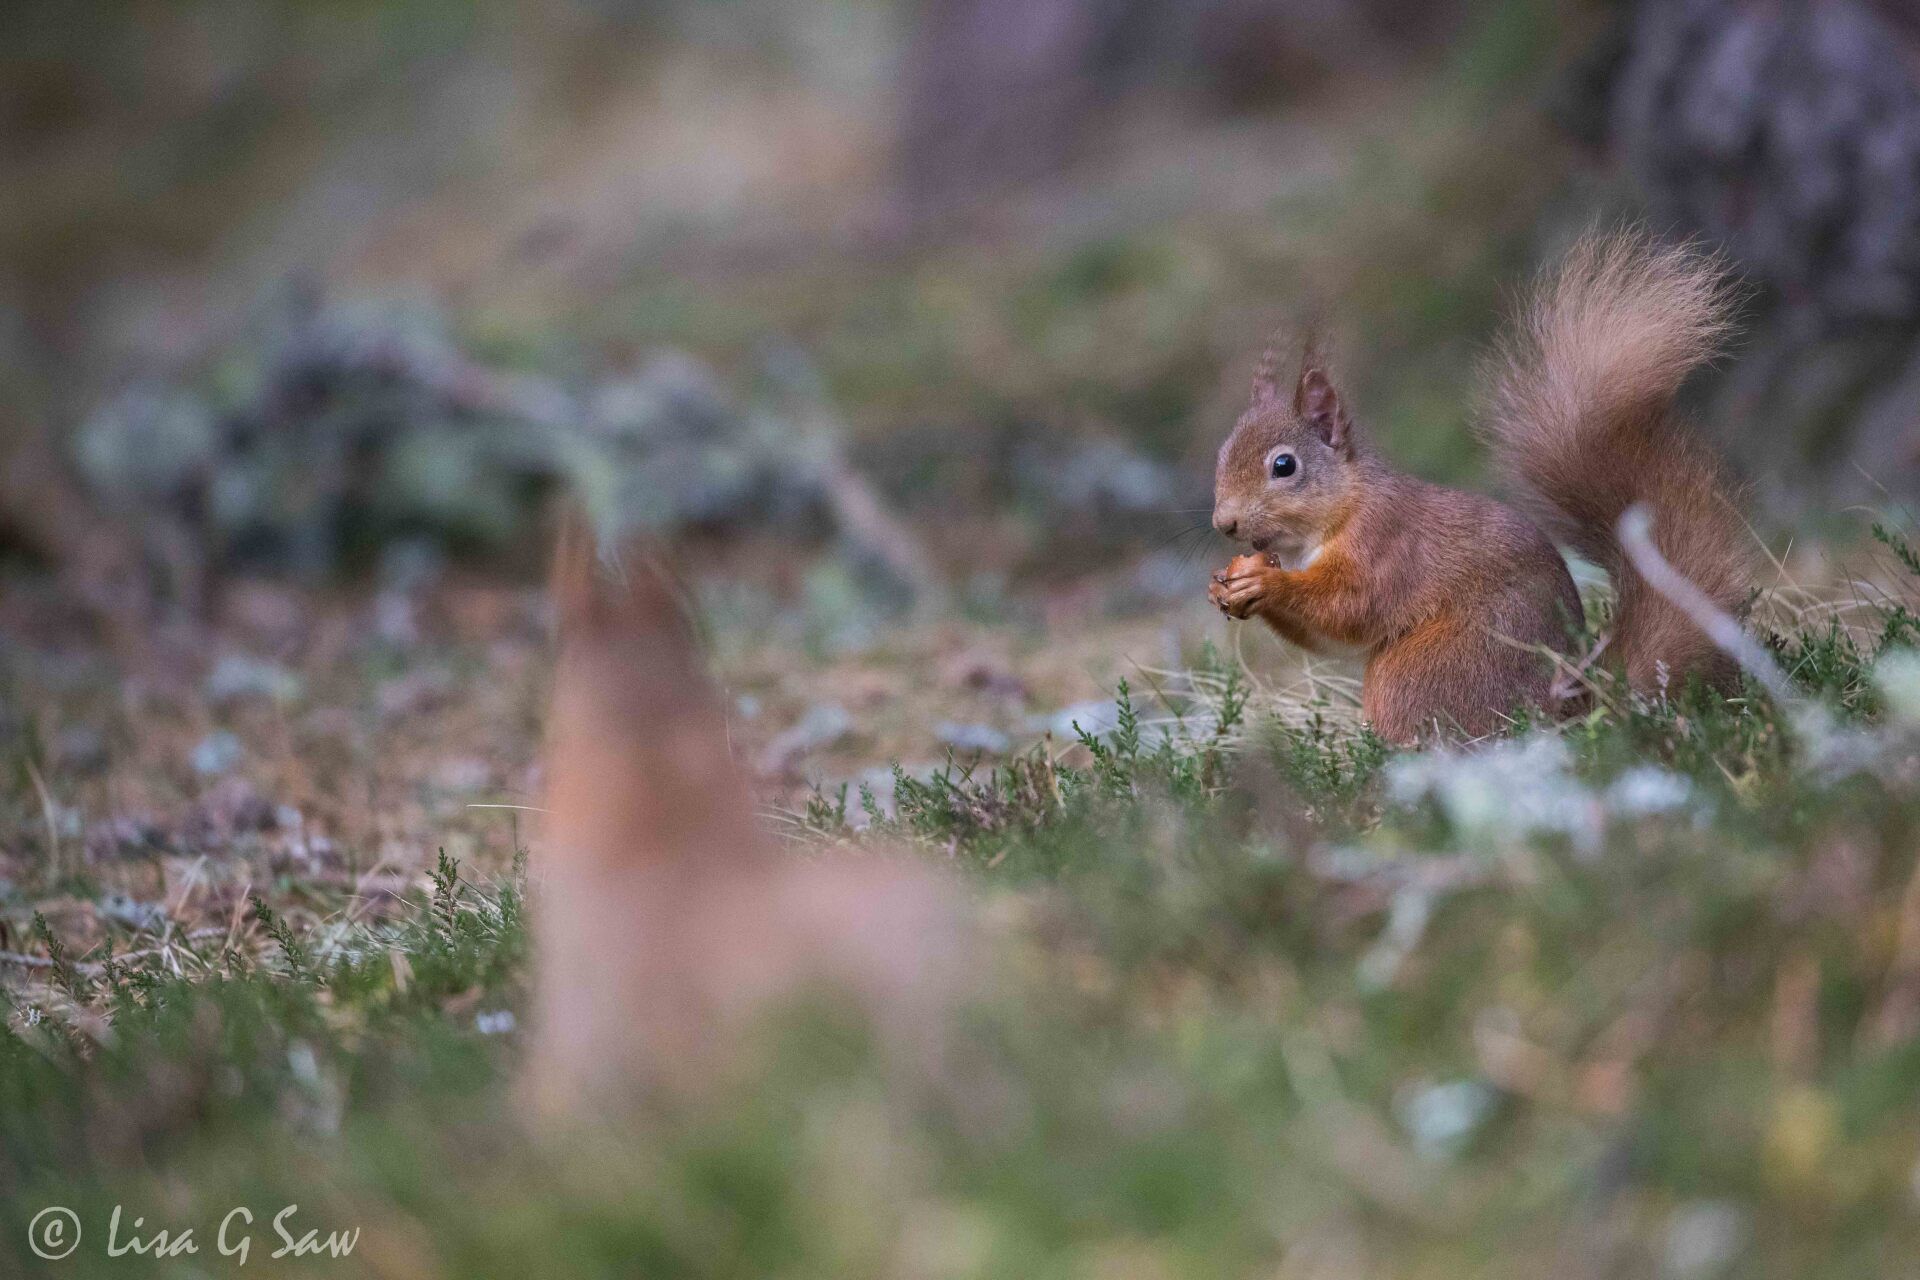 Two Red Squirrels on ground eating nut